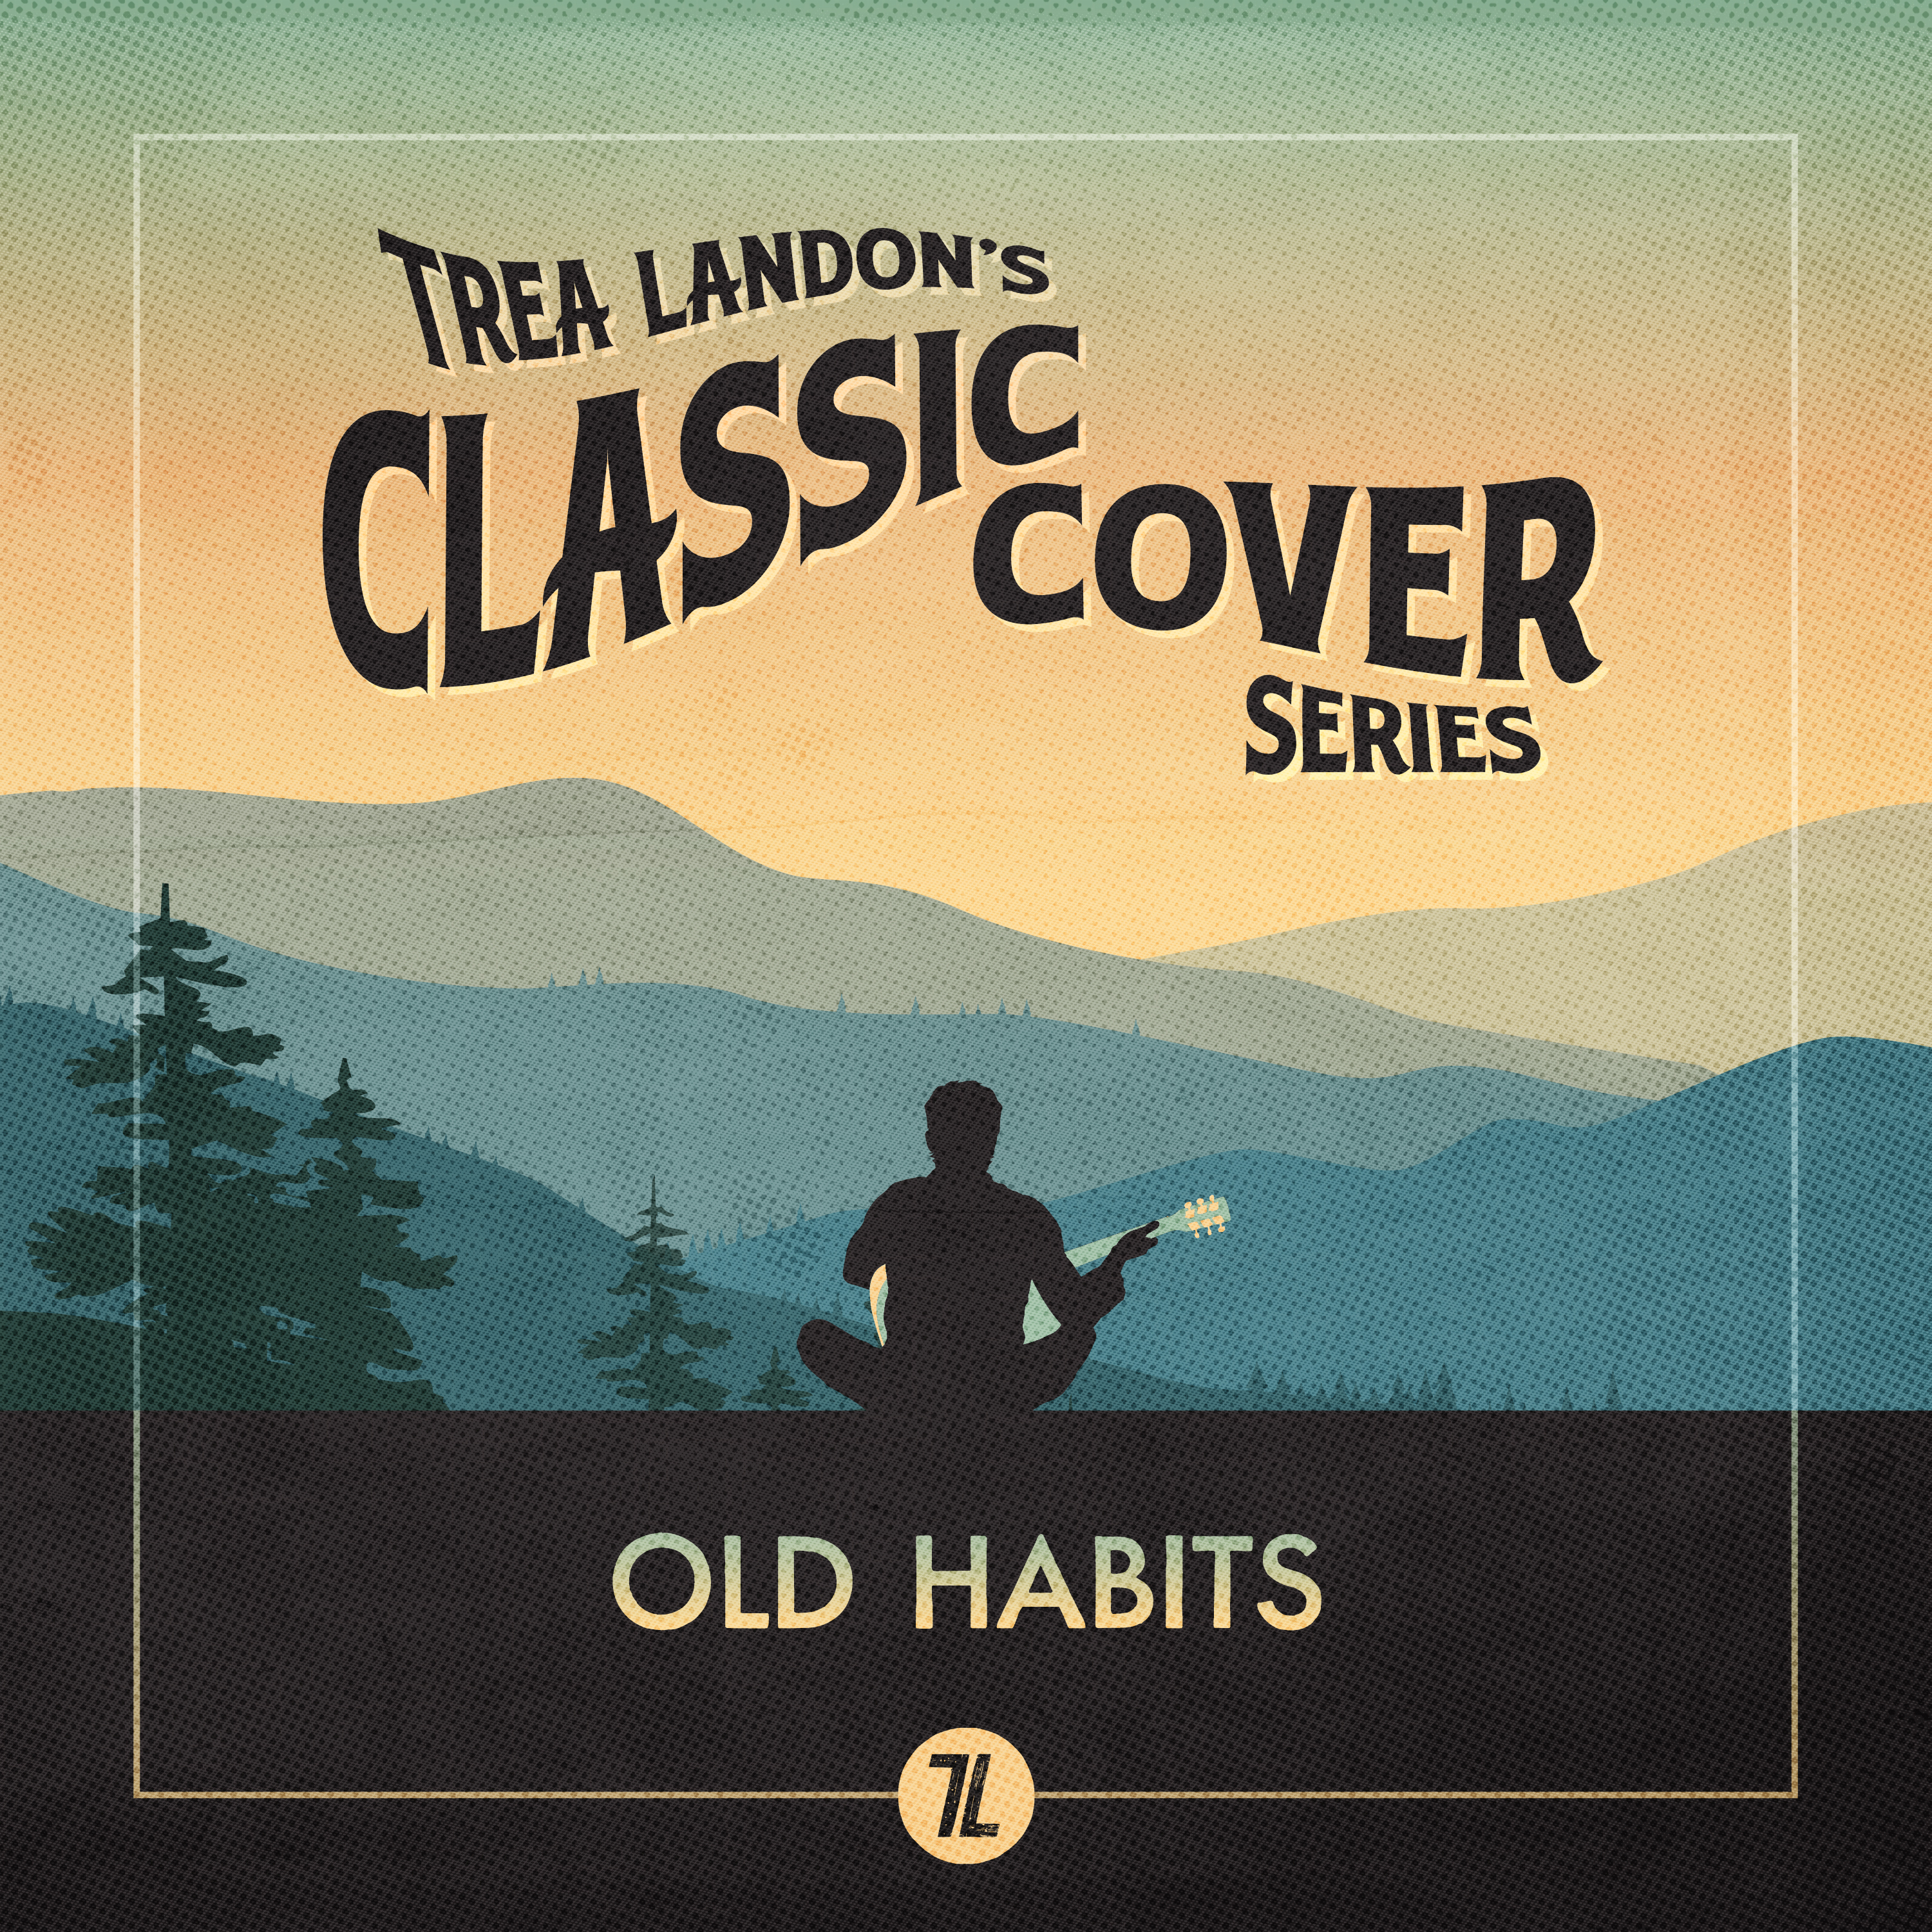 TREA LANDON LAUNCHES NEW CLASSIC COVER SERIES WITH "OLD HABITS"